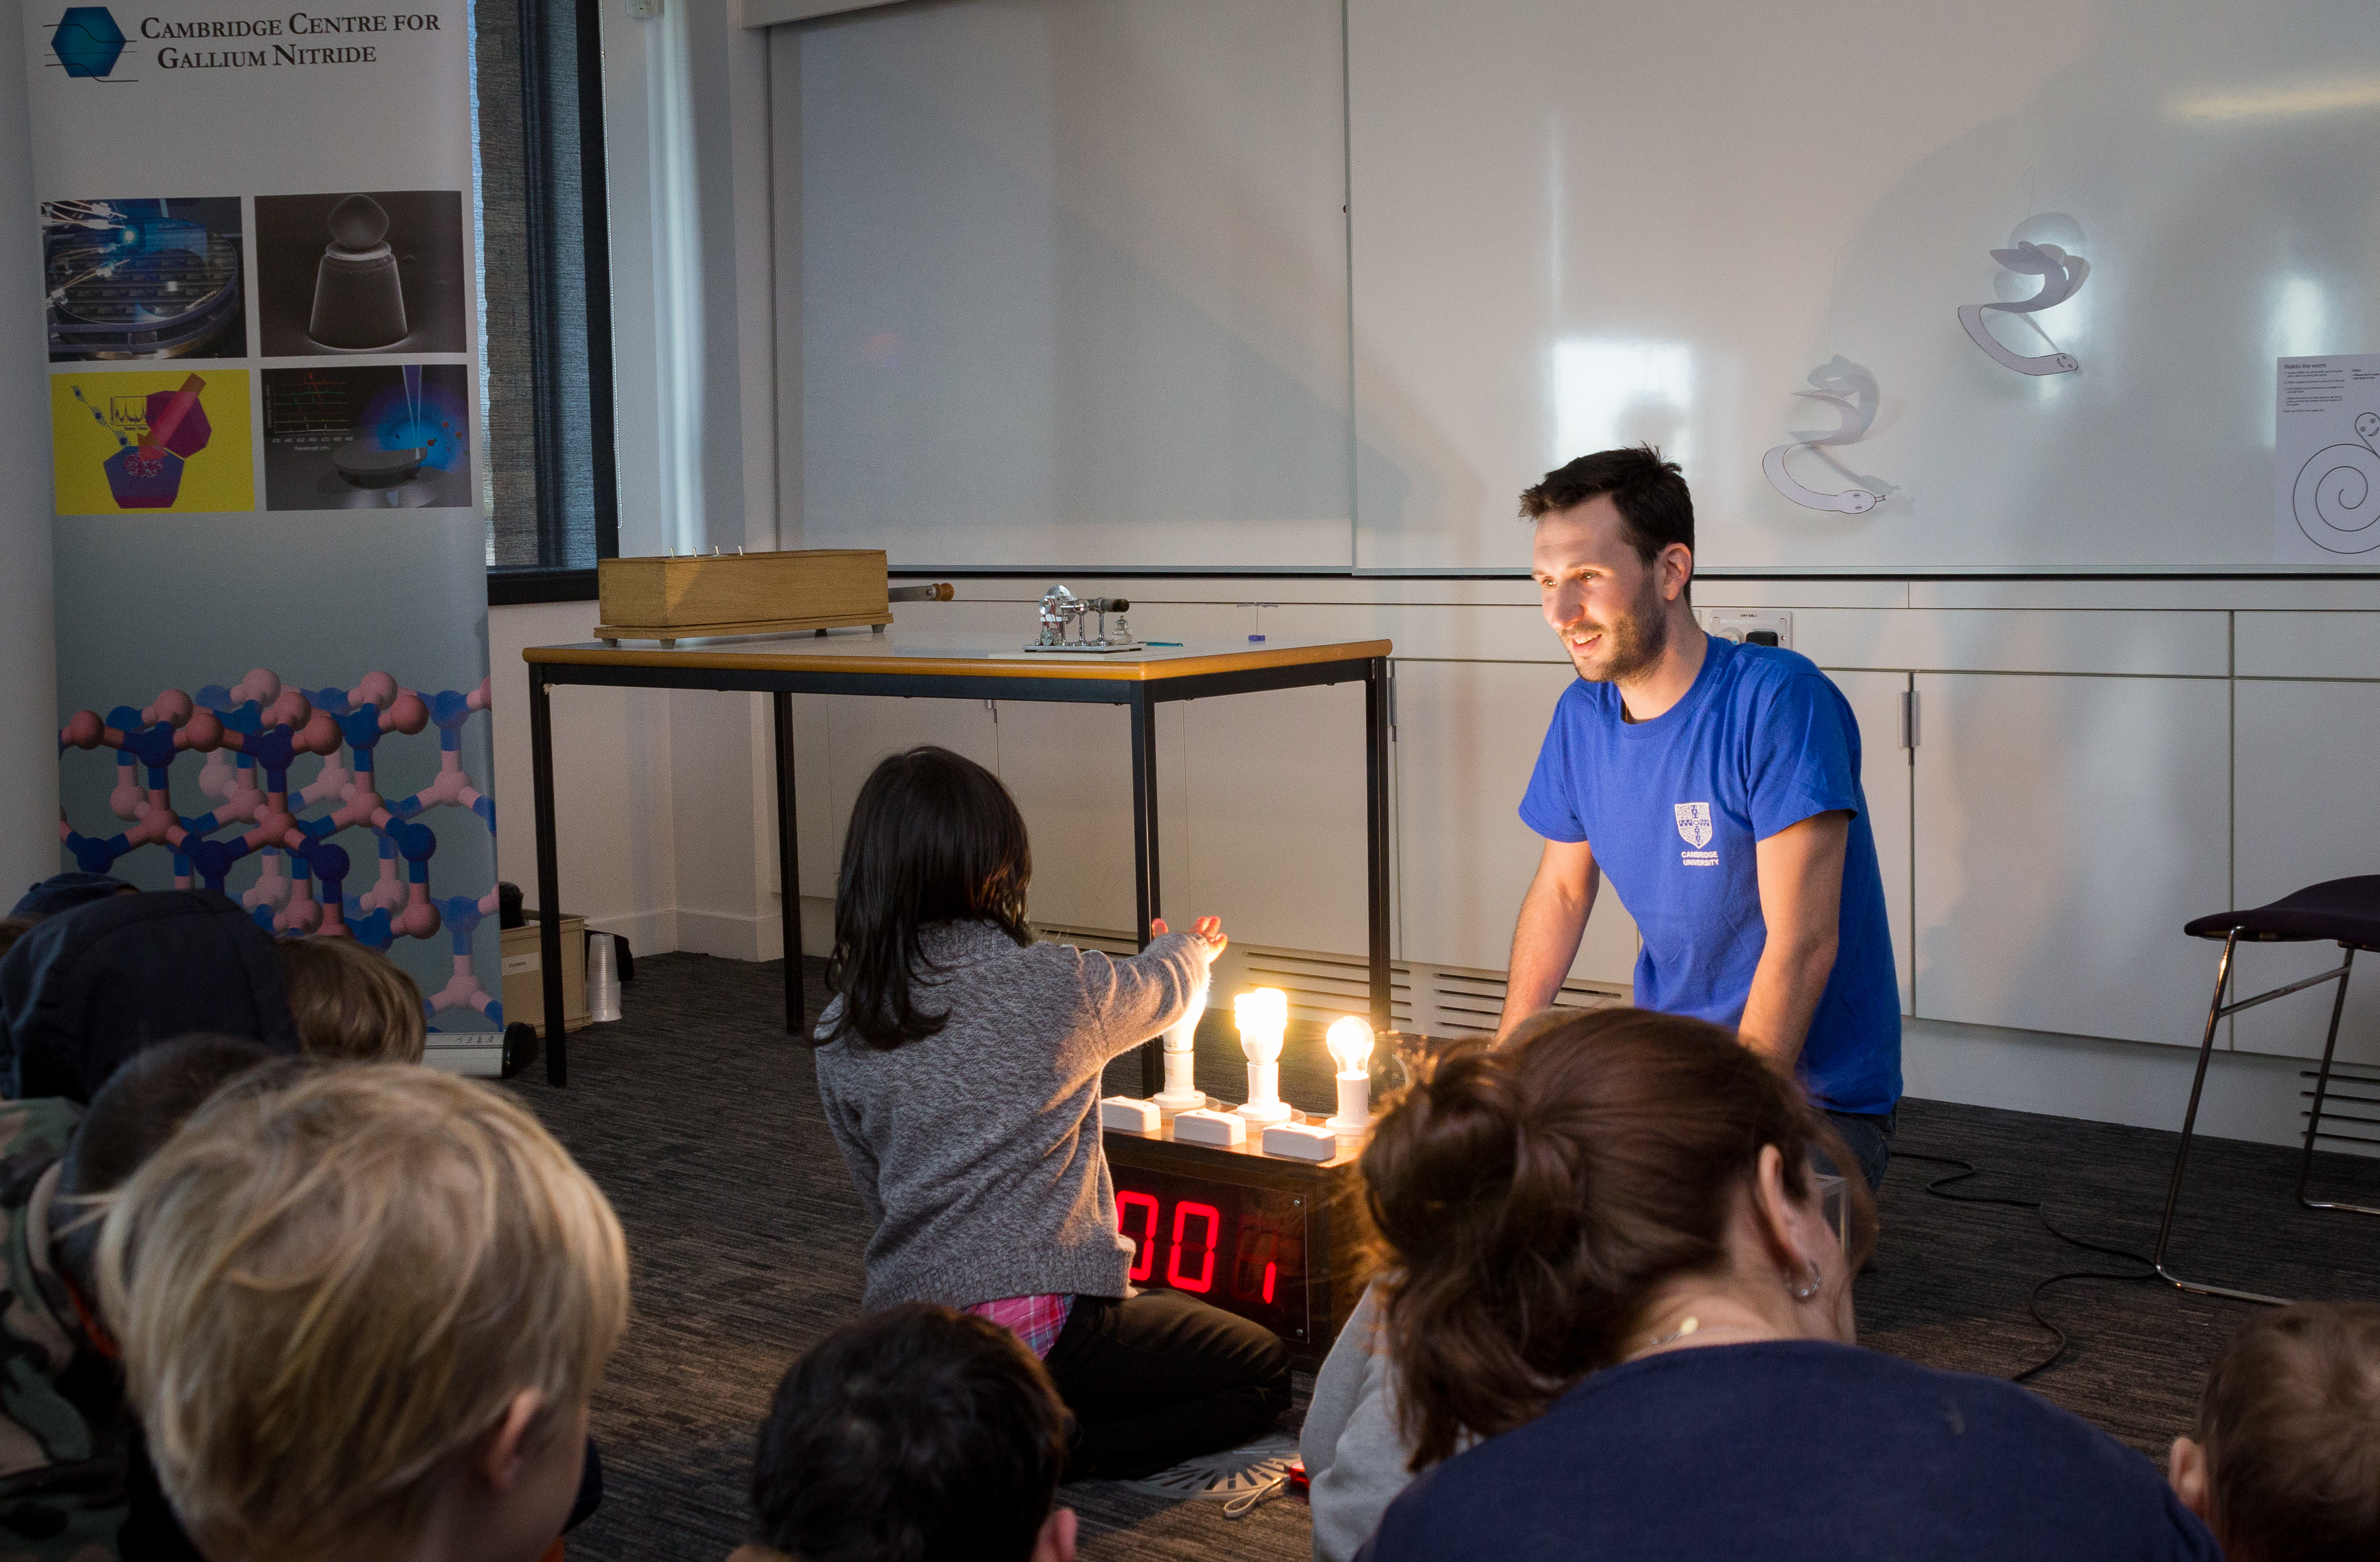 Fabien explains how we can feel the wasted energy of an inefficient light bulb as heat. (Credit: John Jarman)